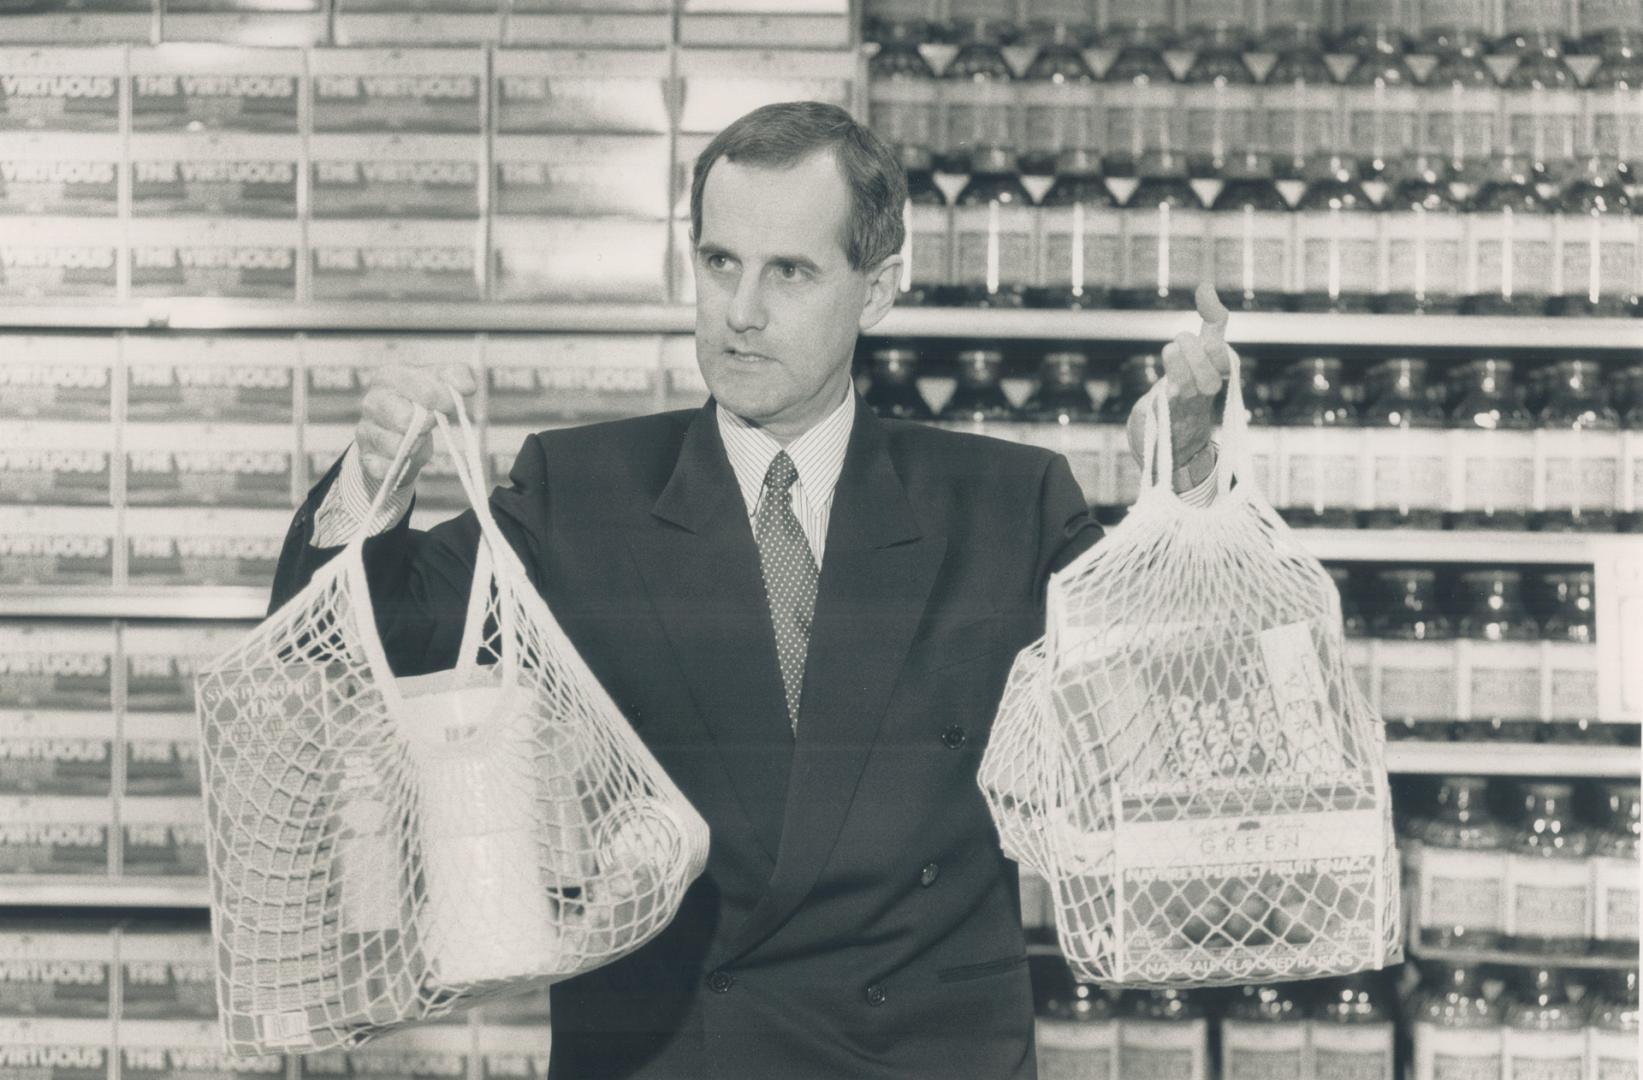 Making a difference: Loblaws president David Stewart holds up new string shopping bags the firm will sell